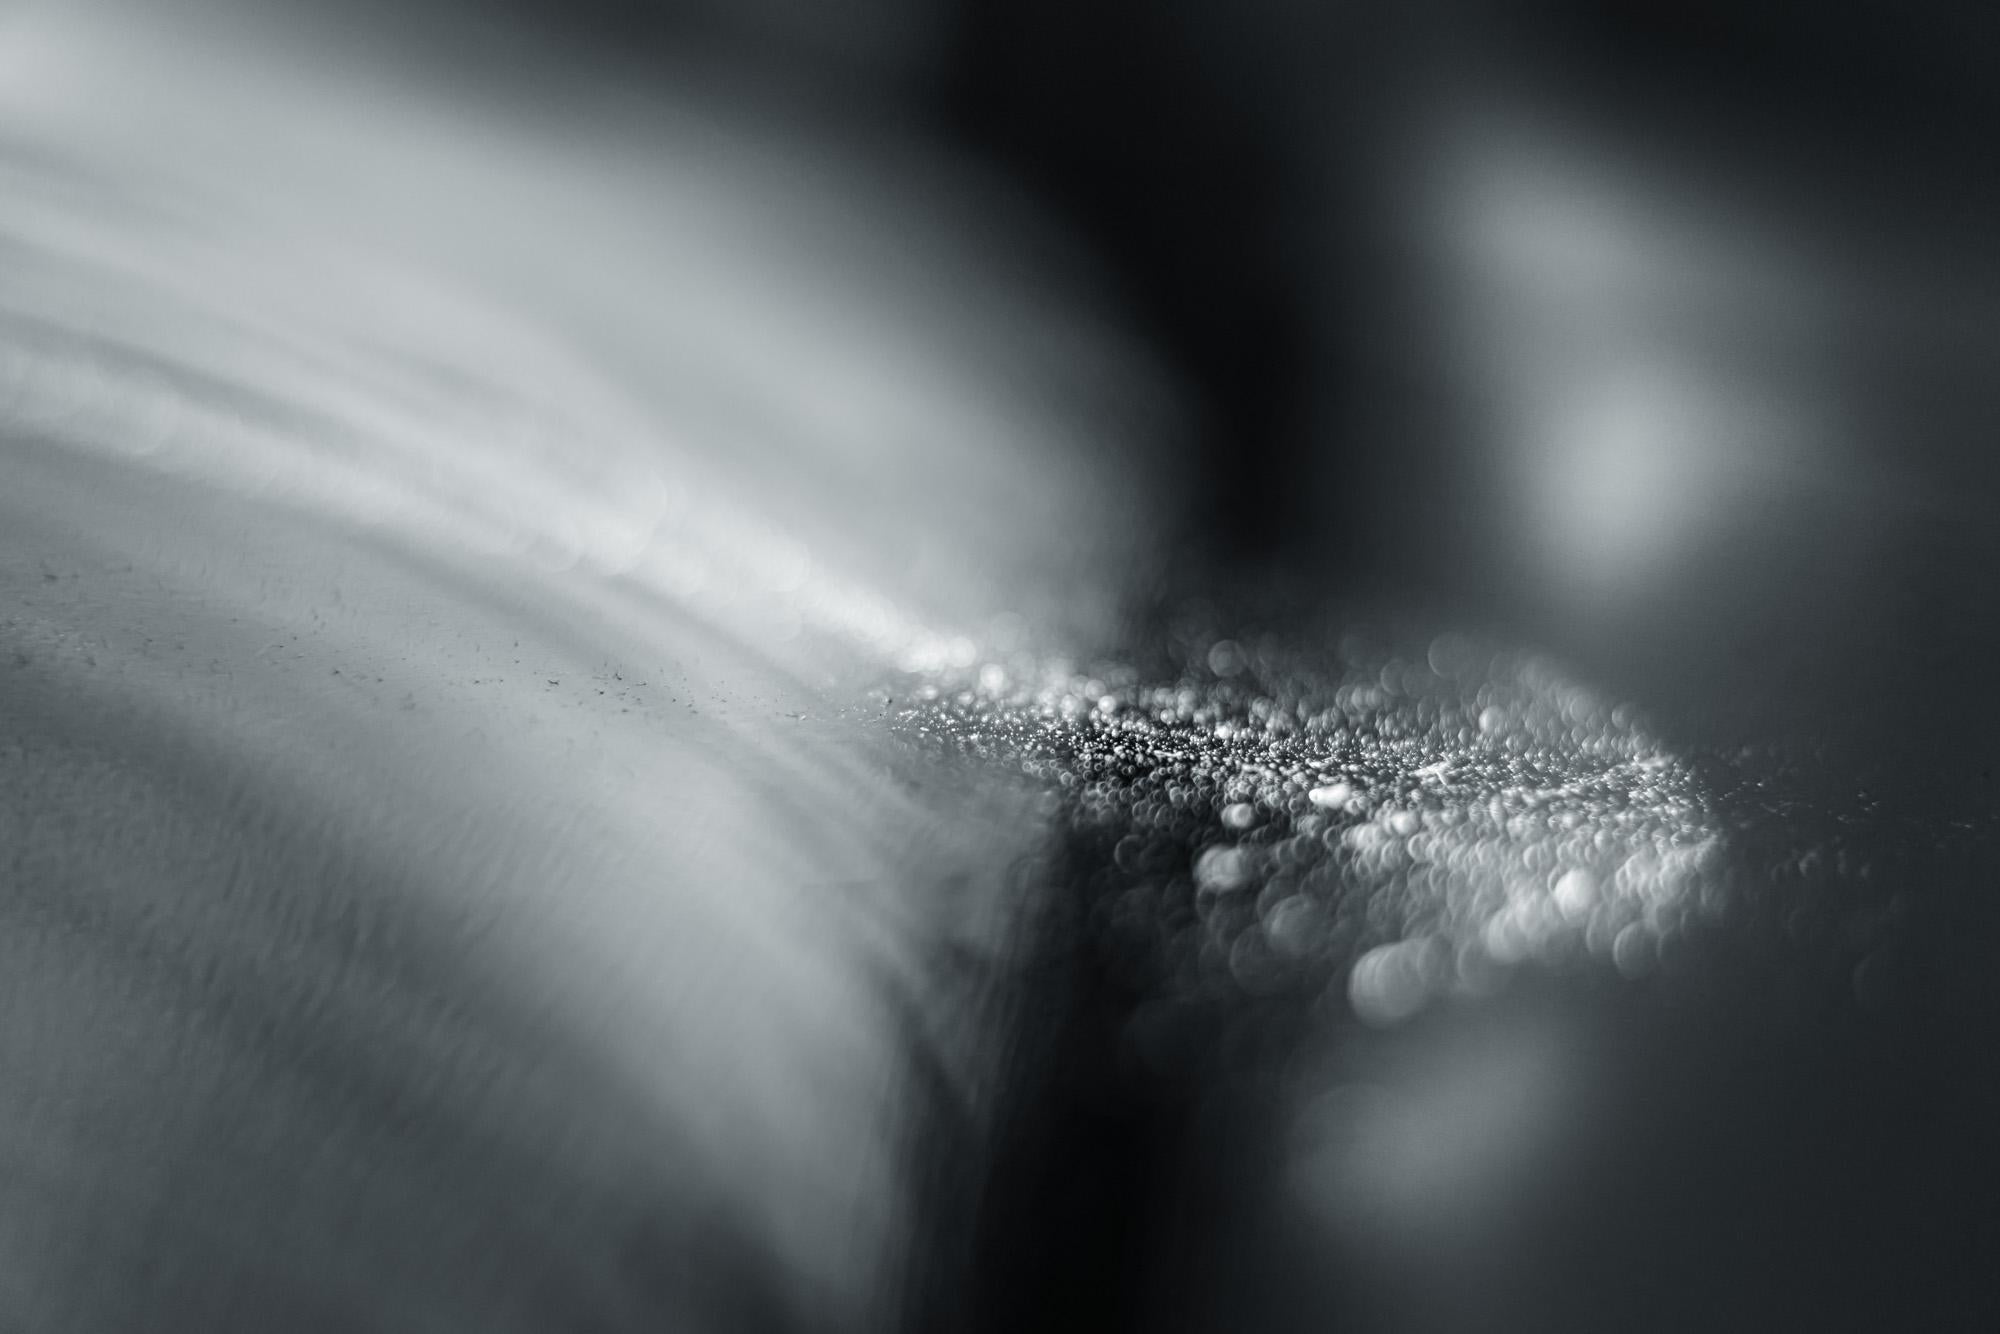 This is Untitled #16 from the Nature of Particles series.

The Nature of Particles series consists of abstract photographs of ordinary particulates, that we observe in our everyday surroundings as floating fragments seen in shafts of light.

My